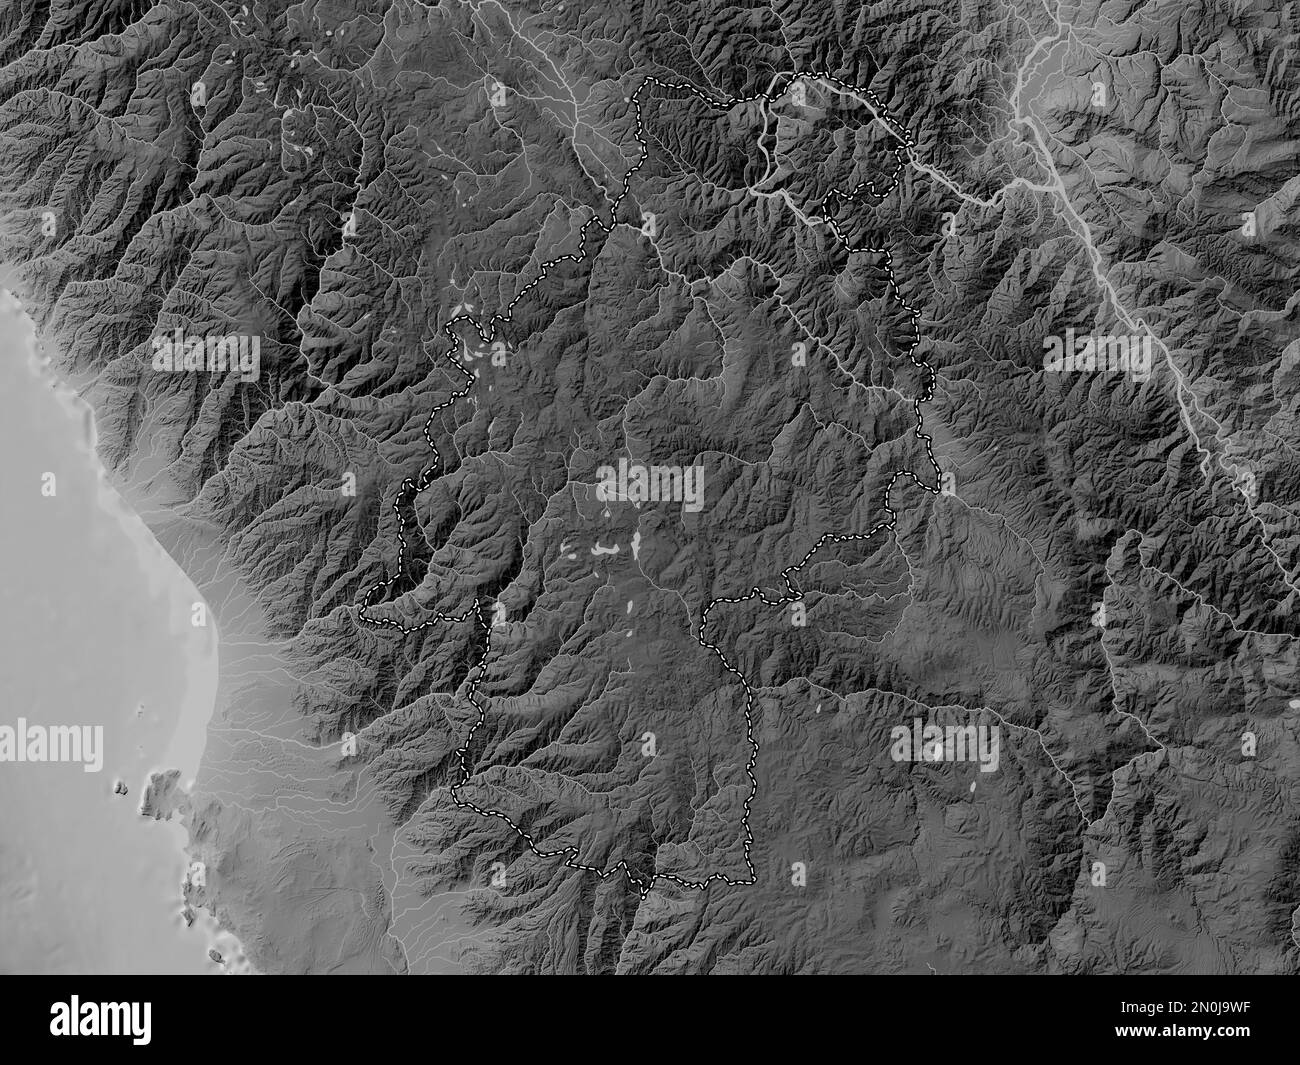 Huancavelica, region of Peru. Grayscale elevation map with lakes and rivers Stock Photo